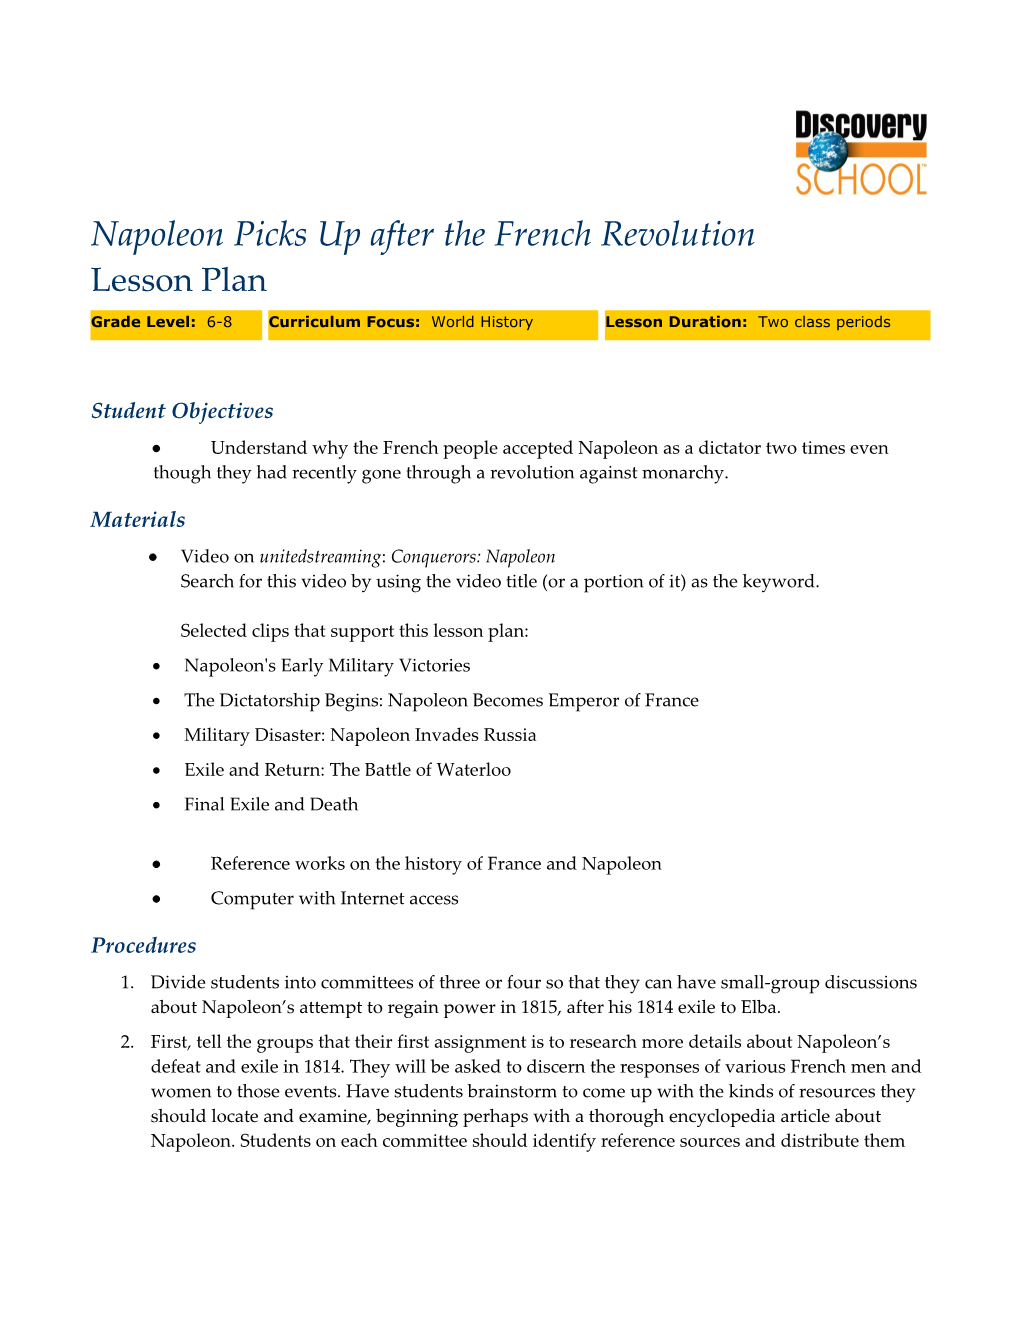 Napoleon Picks up After the French Revolution